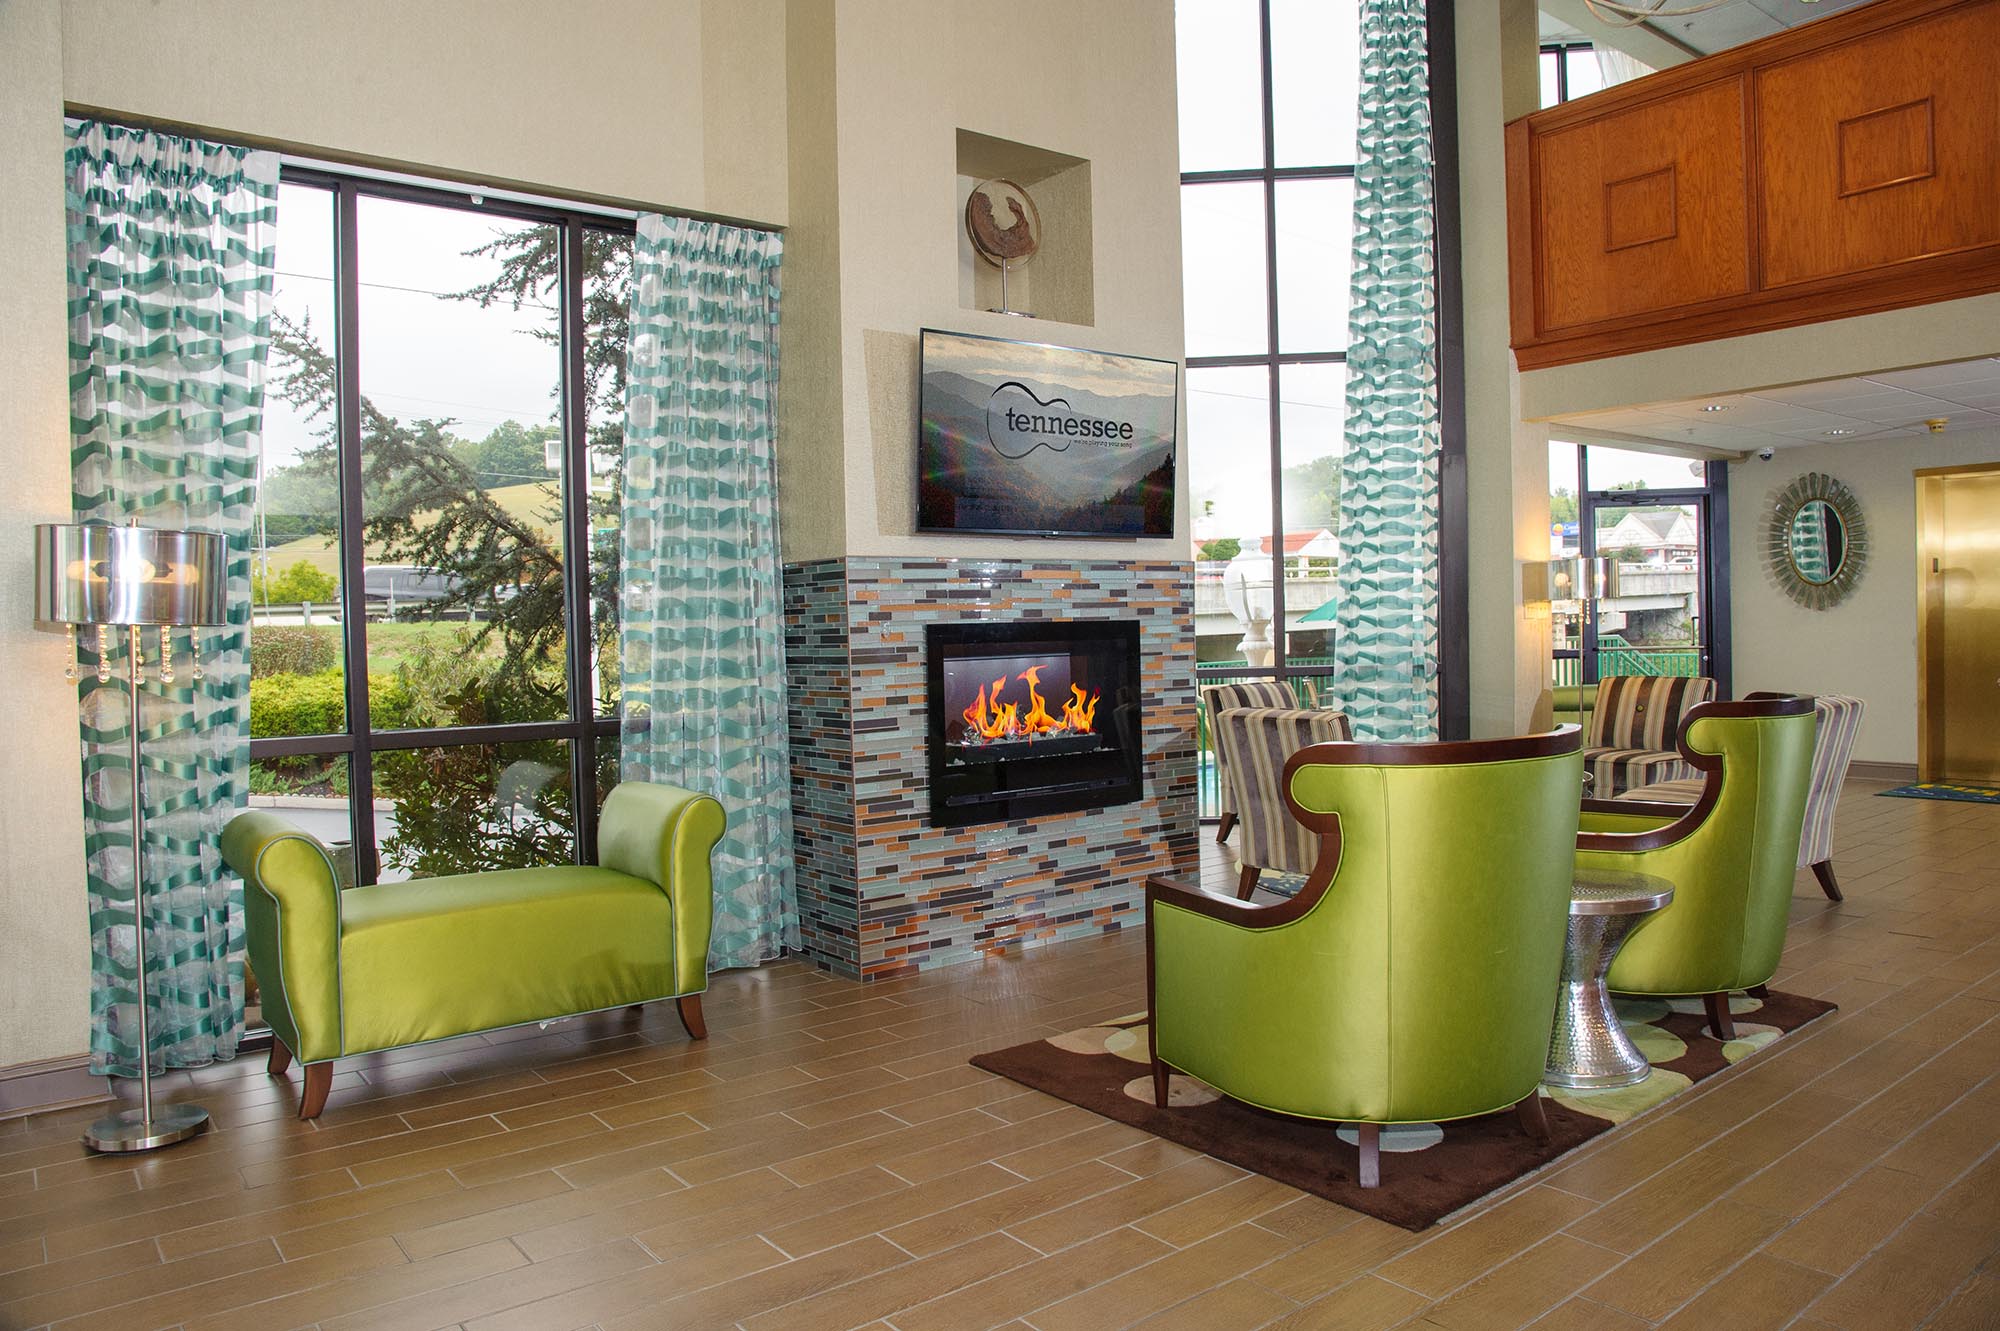 Green chairs to watch fire place and Television